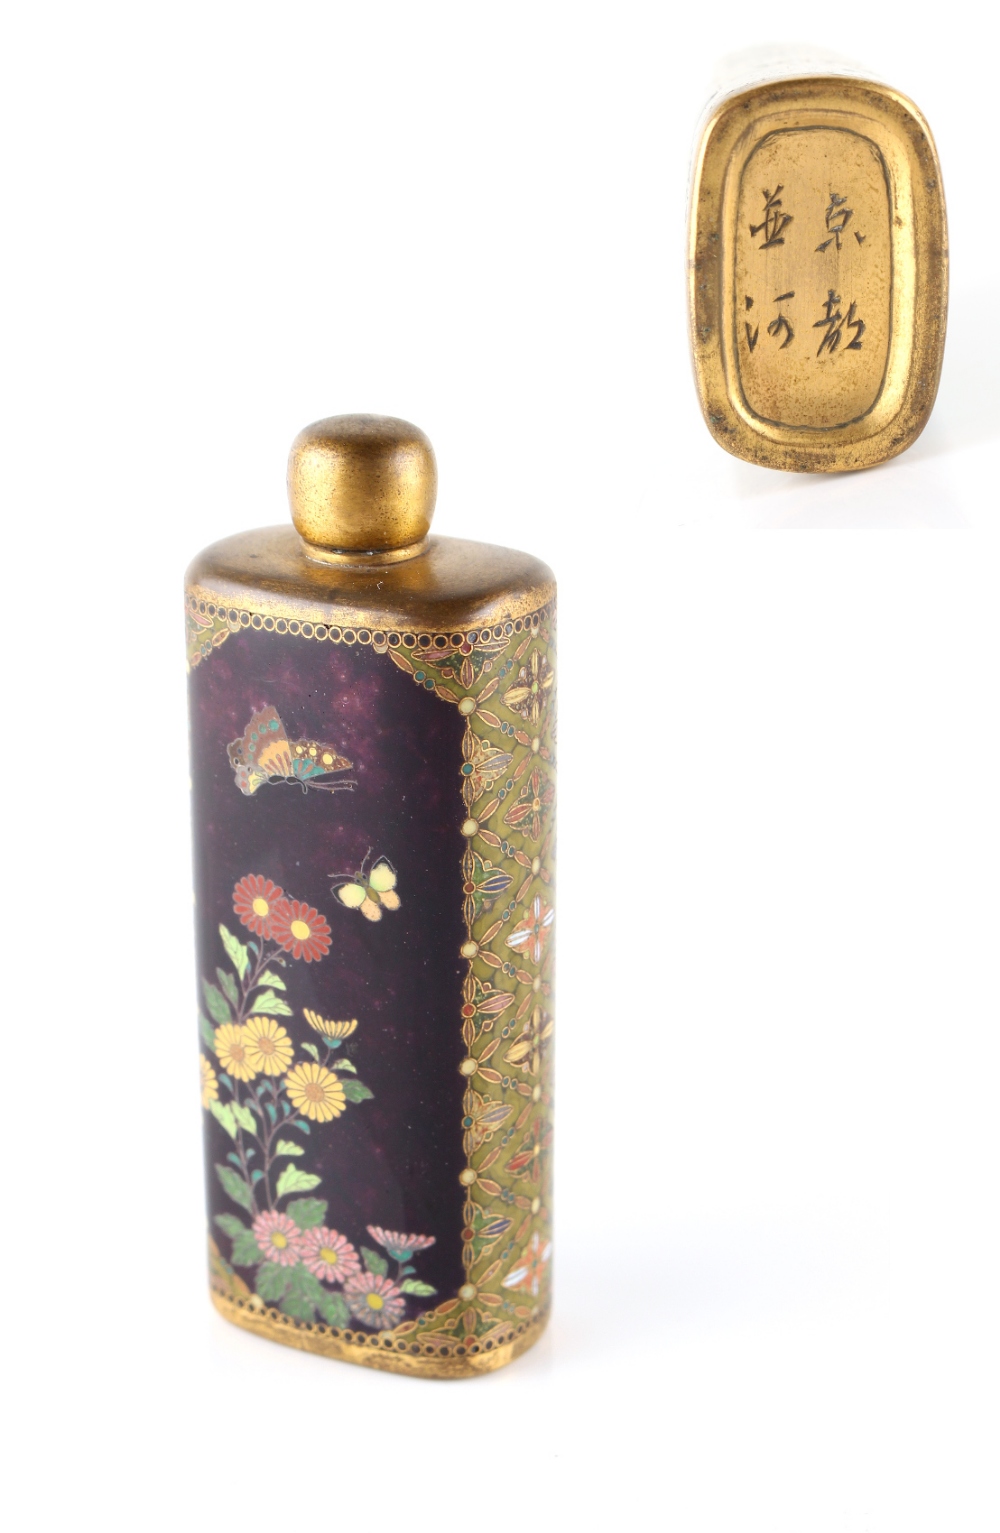 Property of a lady - a fine Japanese Meiji period signed cloisonne scent bottle by the workshop of